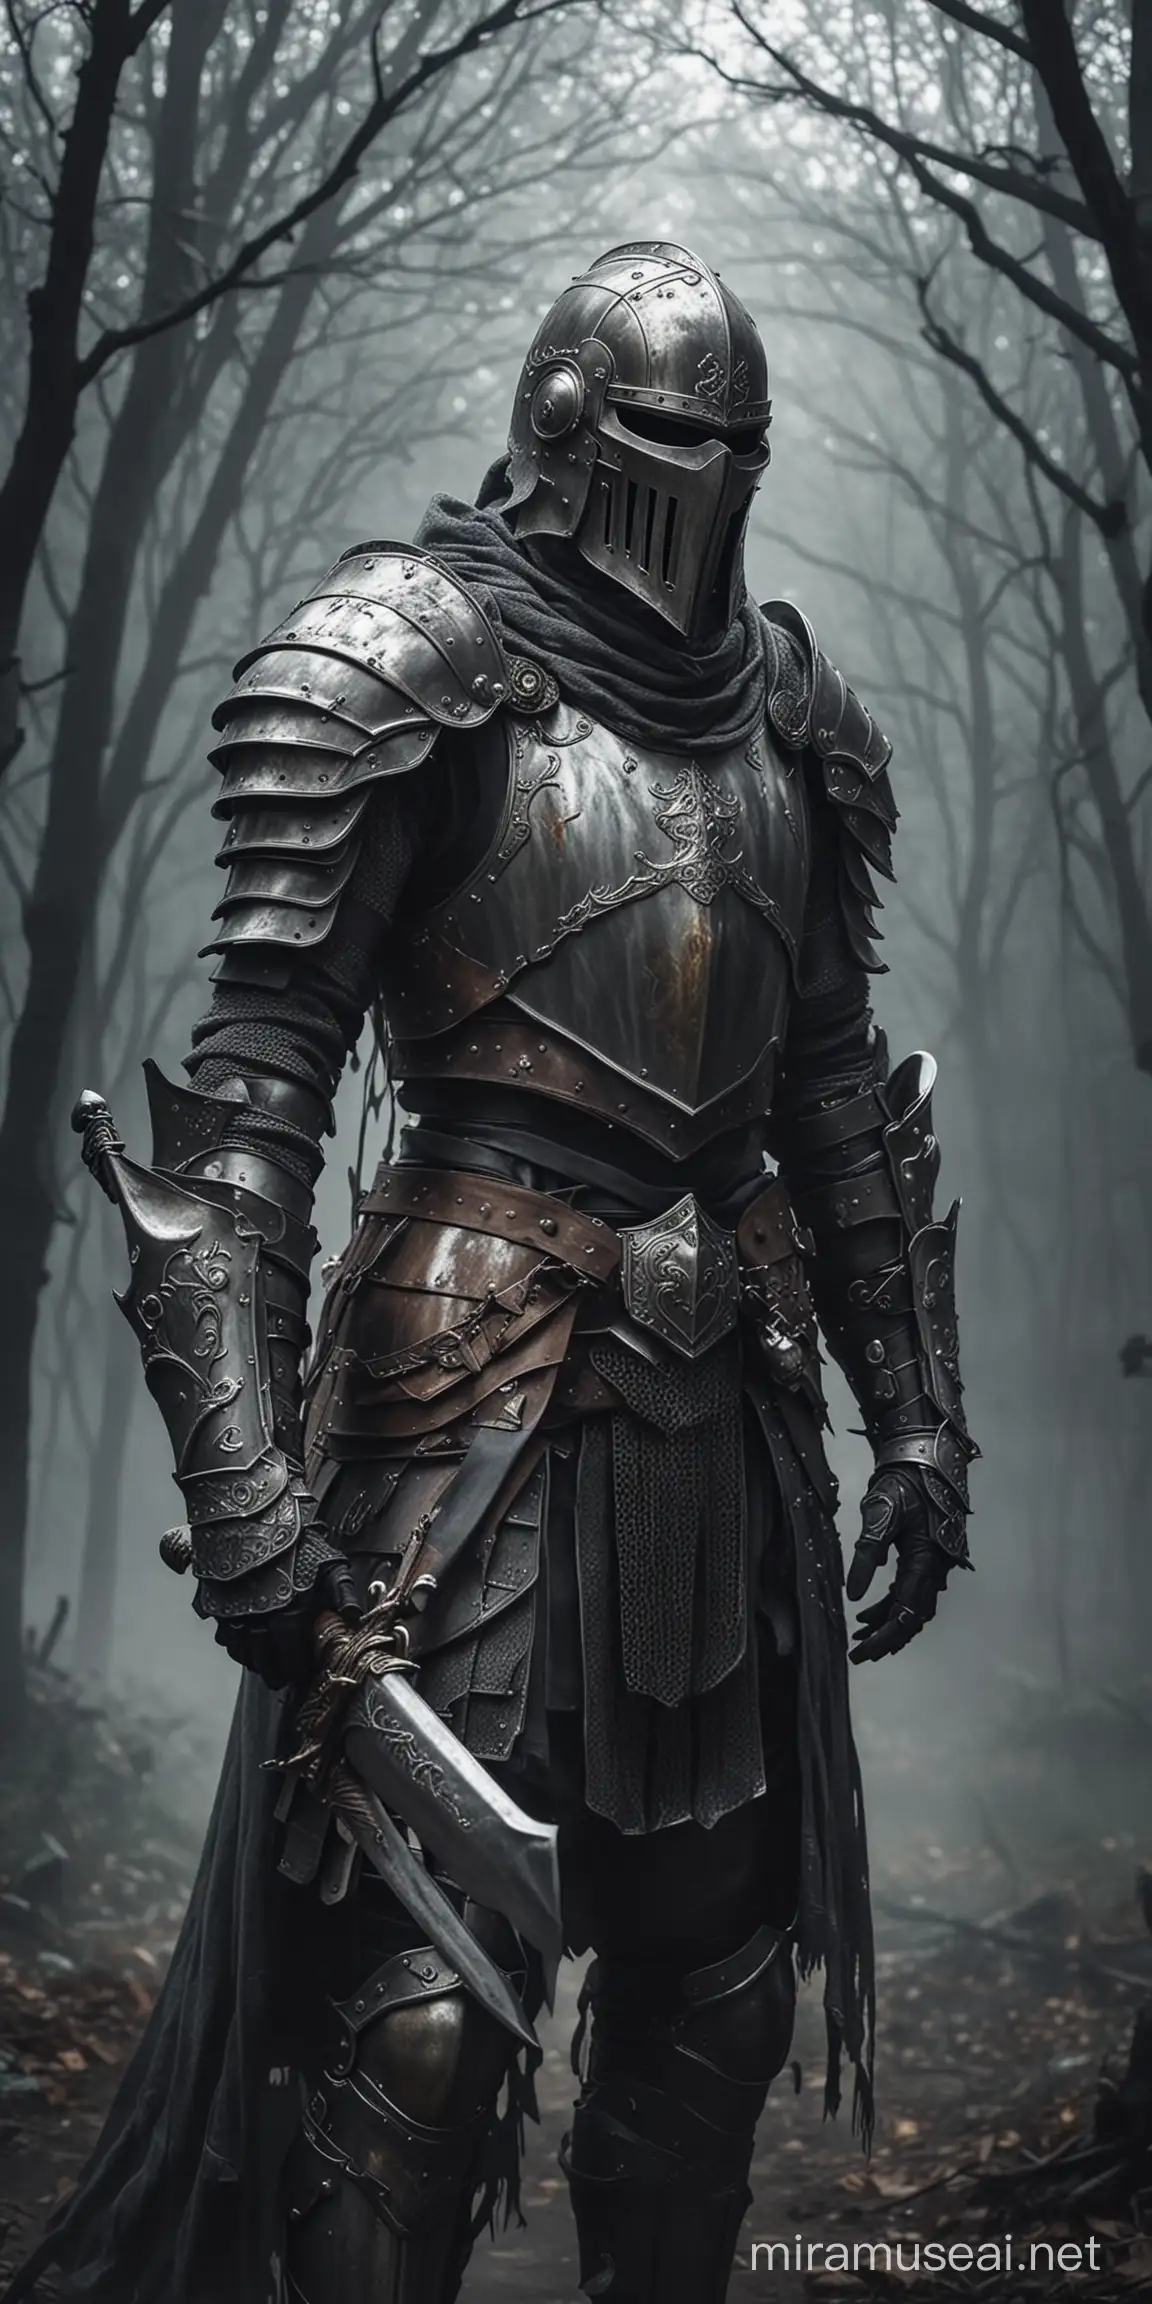 ghost in knights armor. The ghost is wearing the full armor and wears a helmet that covers the face